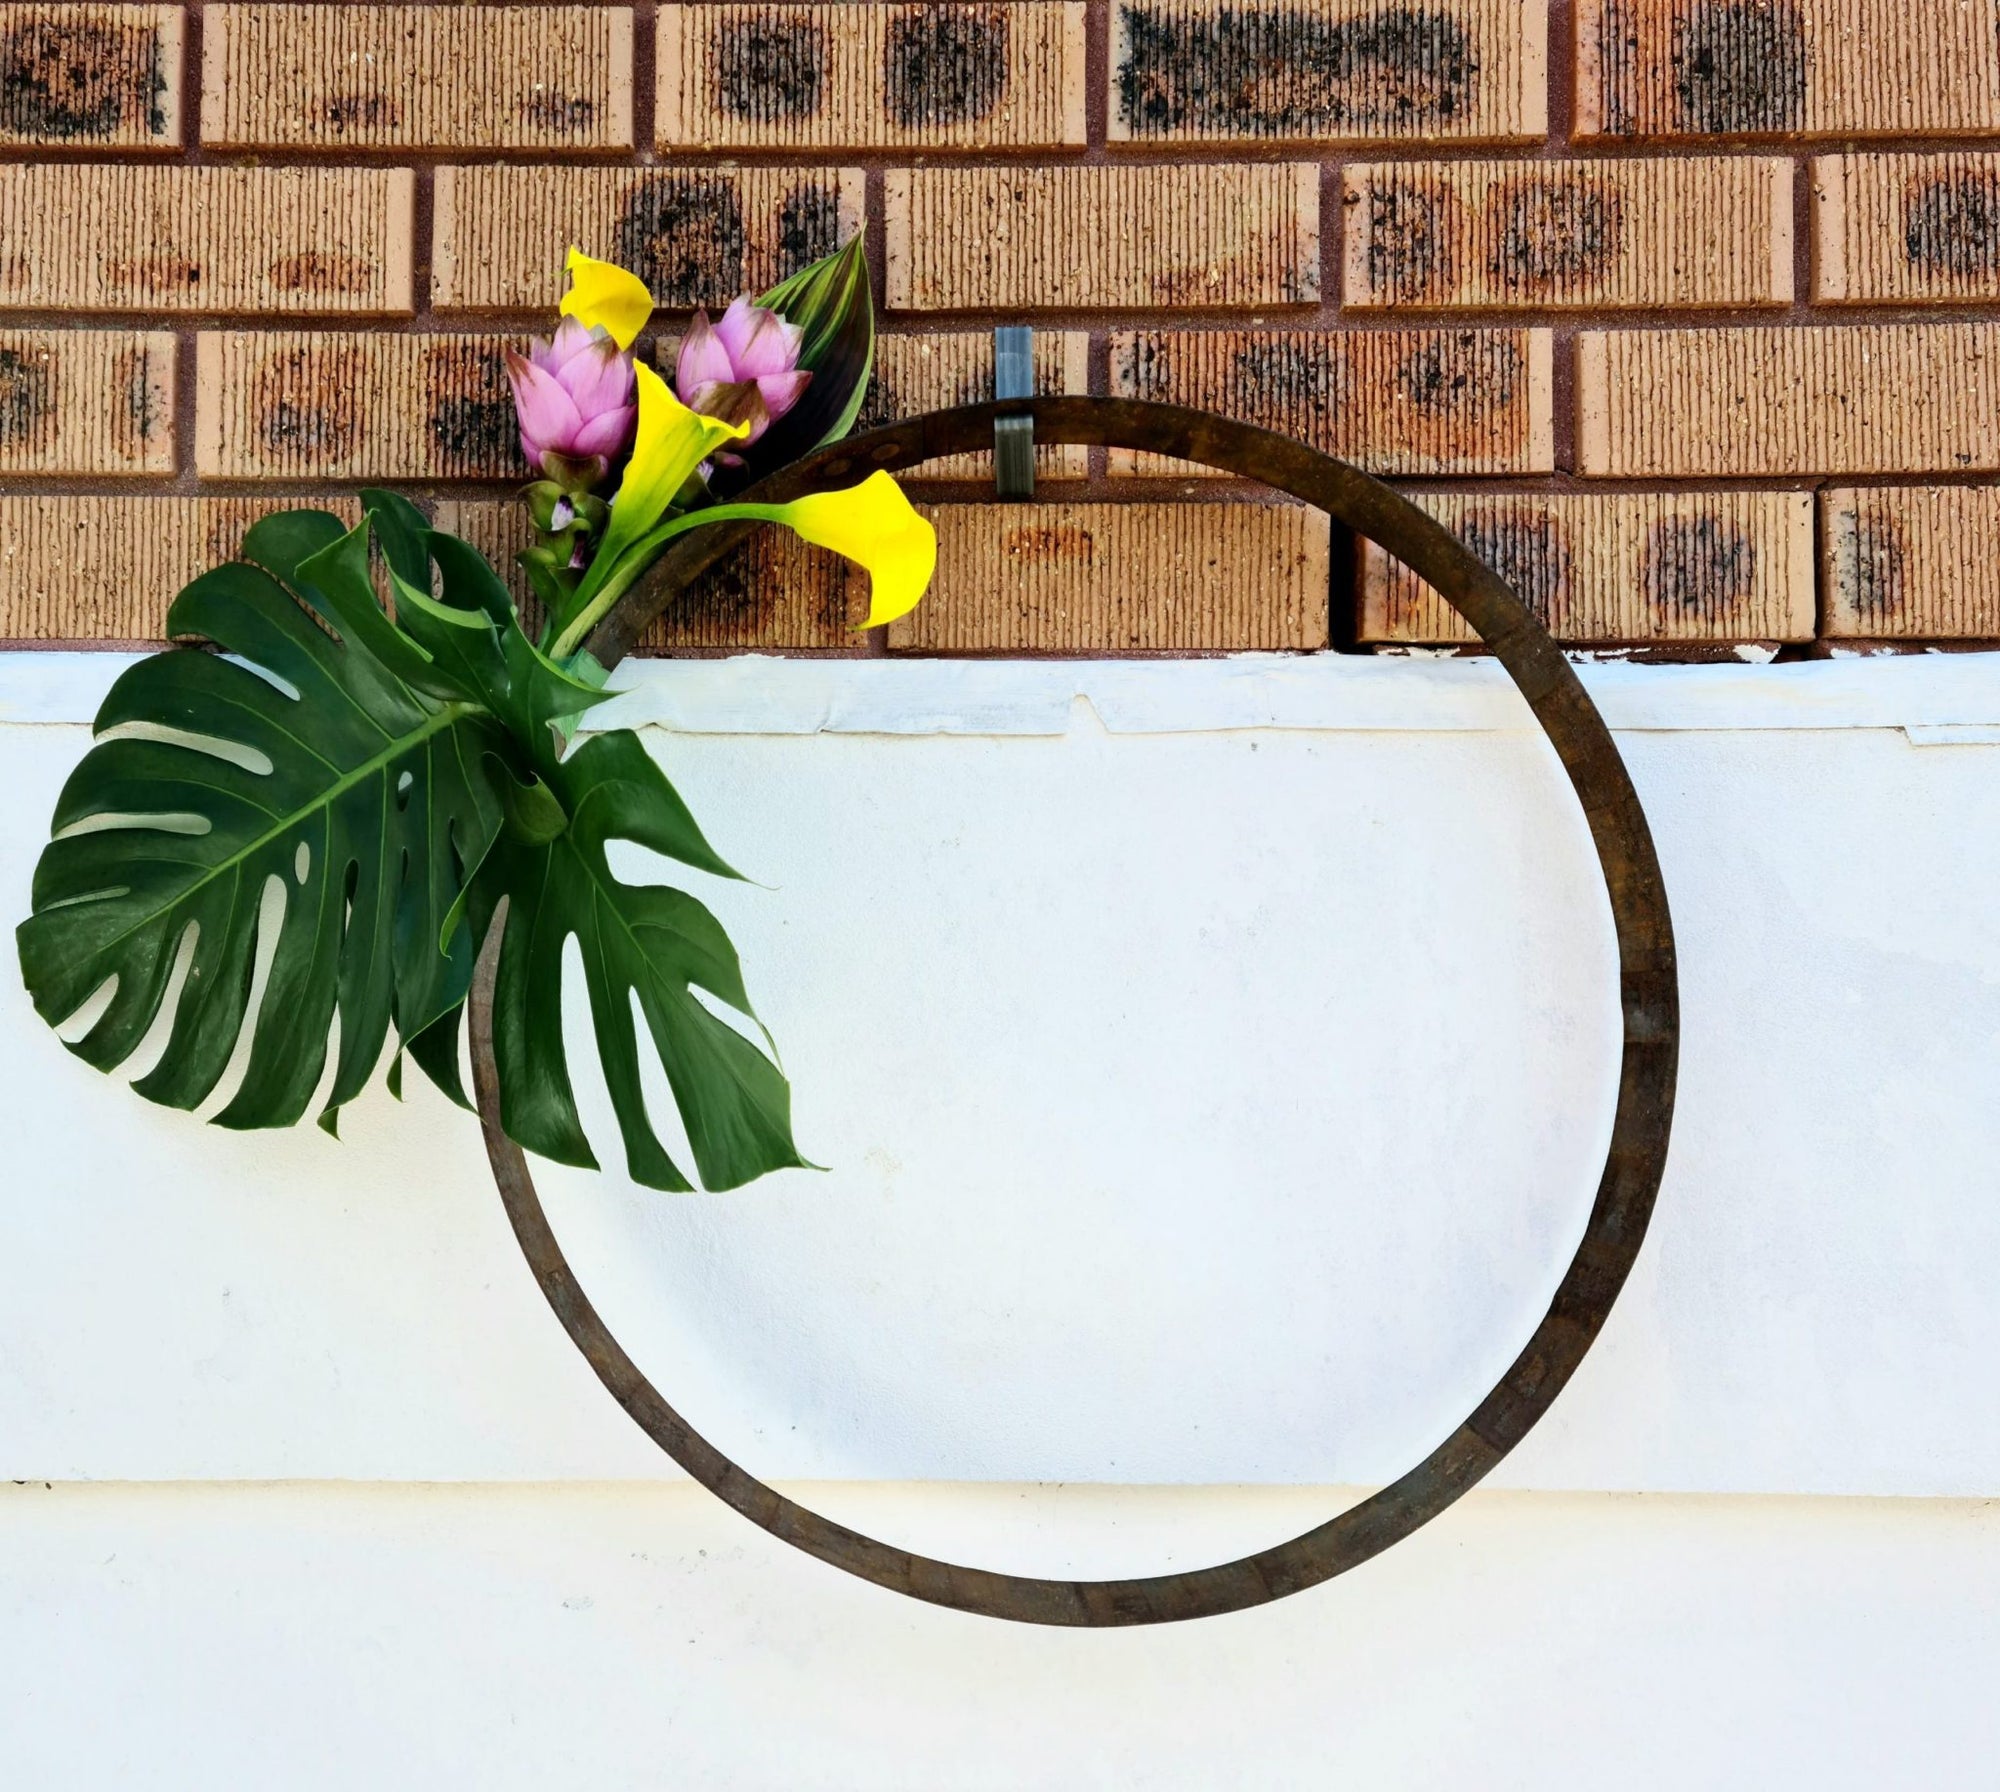 Brick wall with a brick hook hanging the flower leaves circle decoration